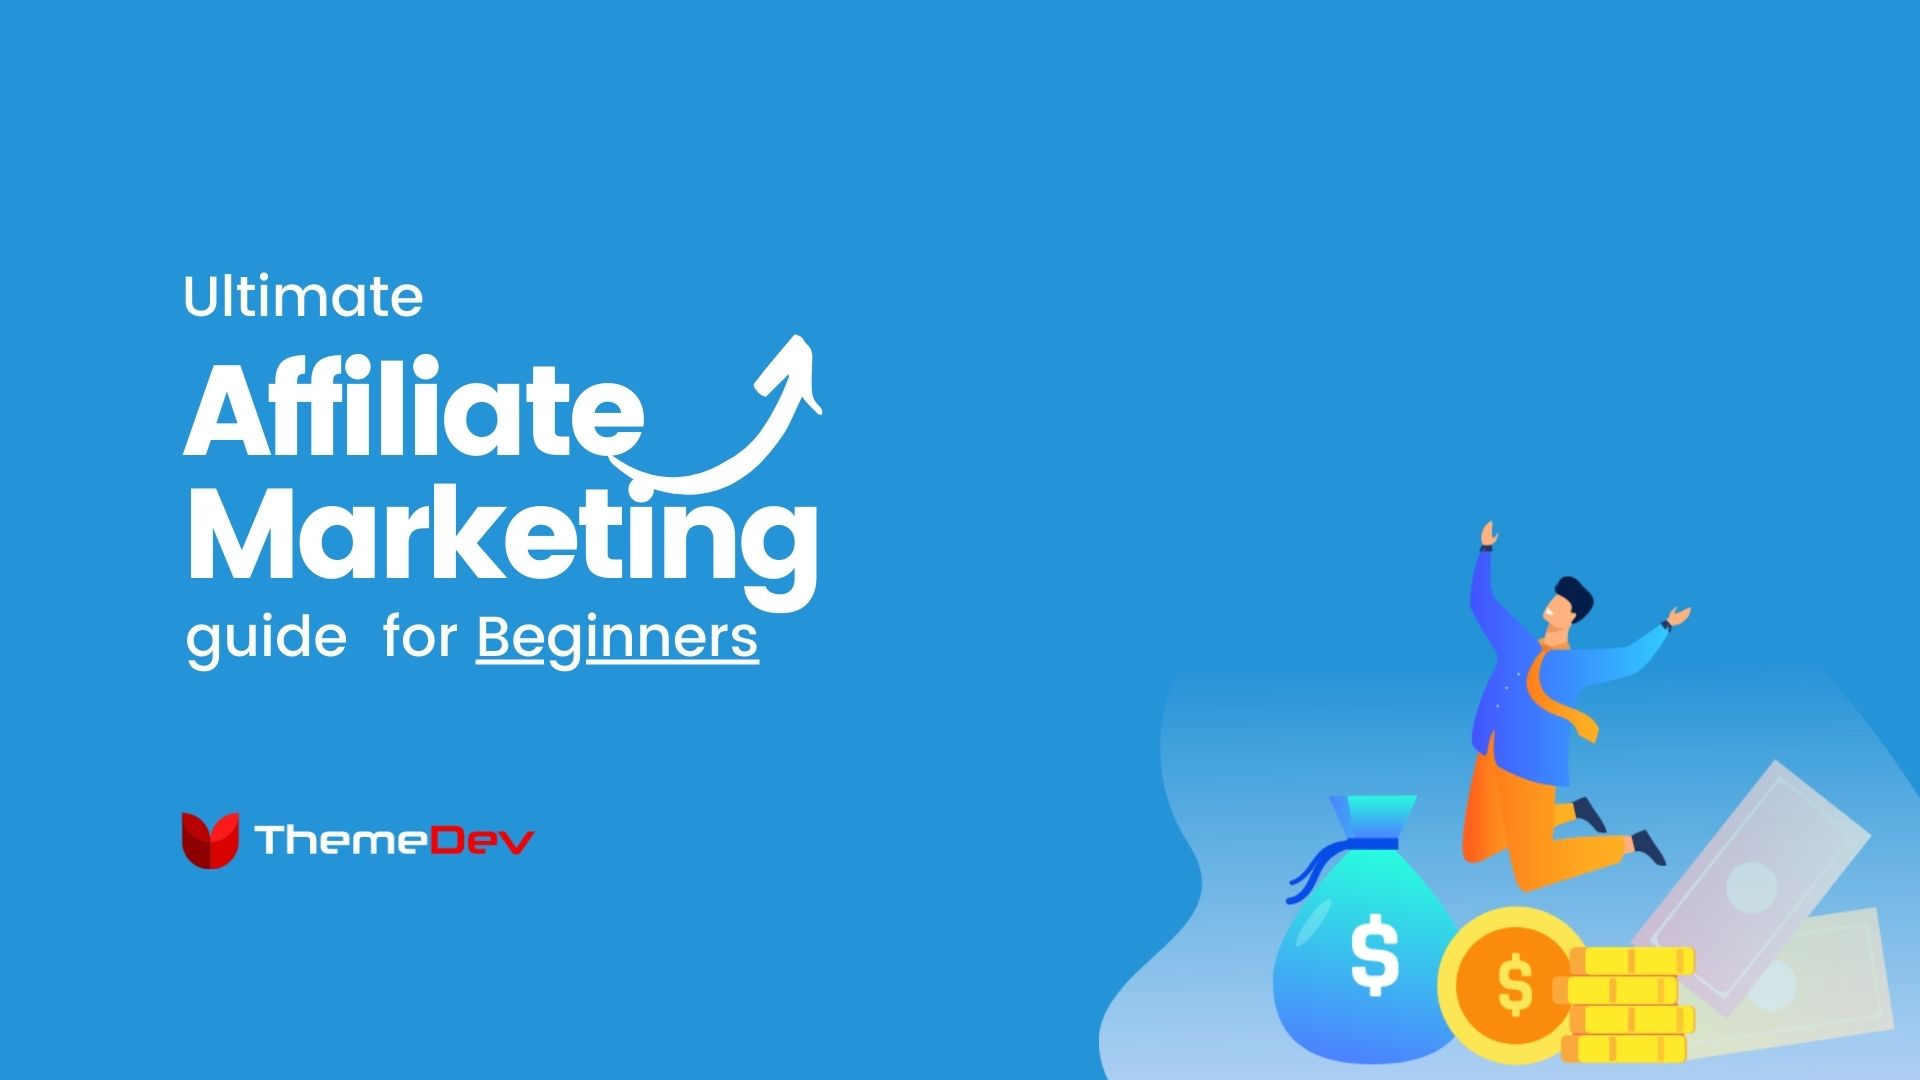 The Ultimate Affiliate Marketing Guide for Beginners